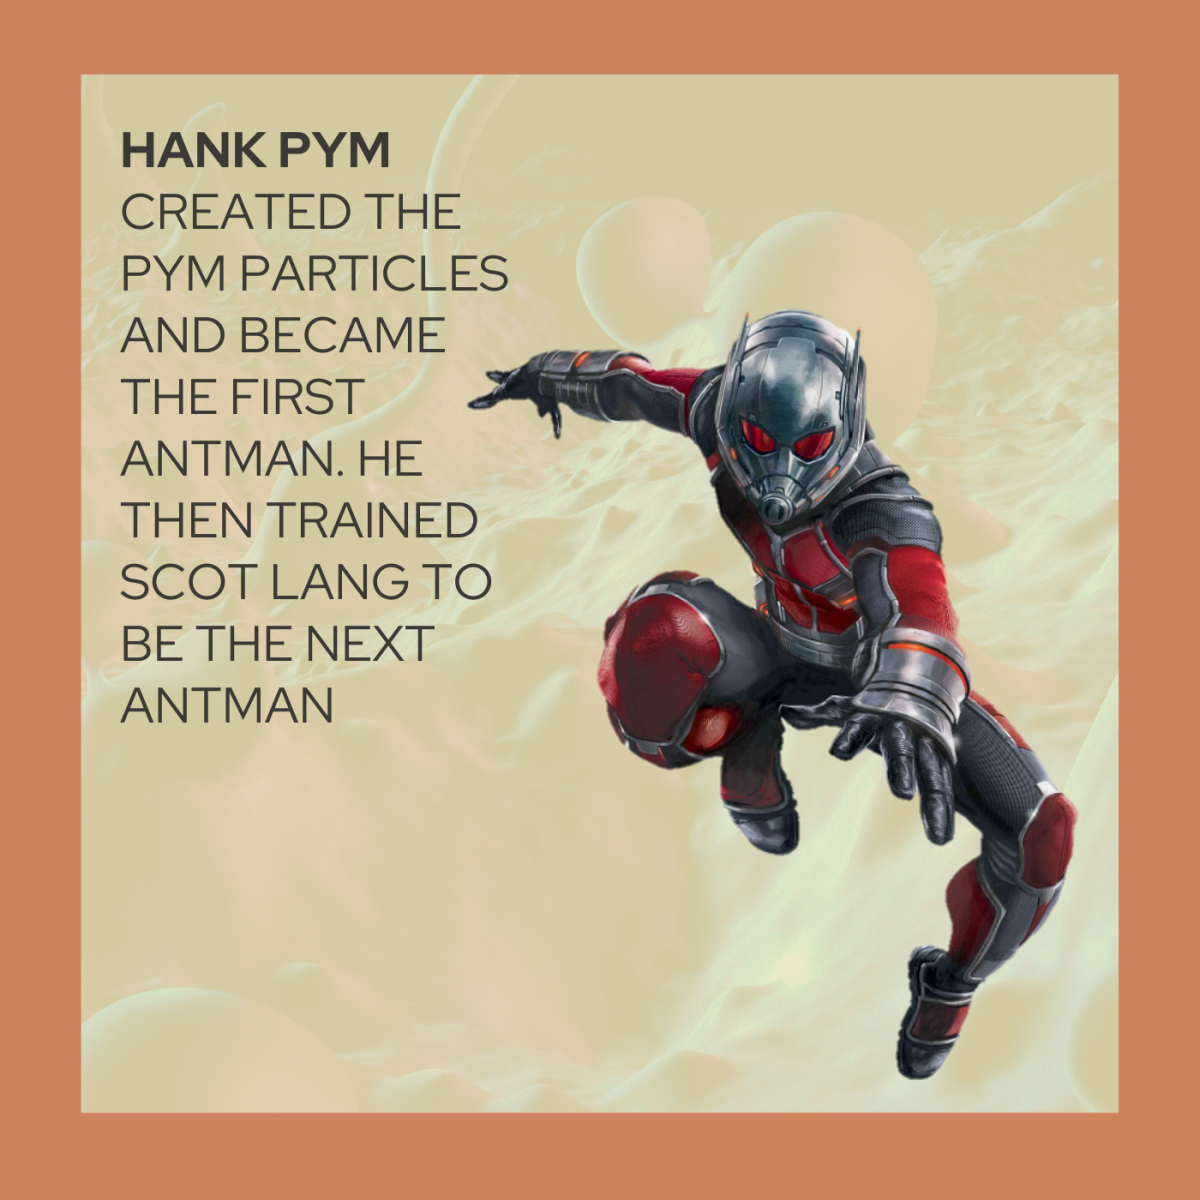 After Scott Lang rob Hank Pym's home with his friends, Hank Pym recruited and trained him on how to use the Antman suit.